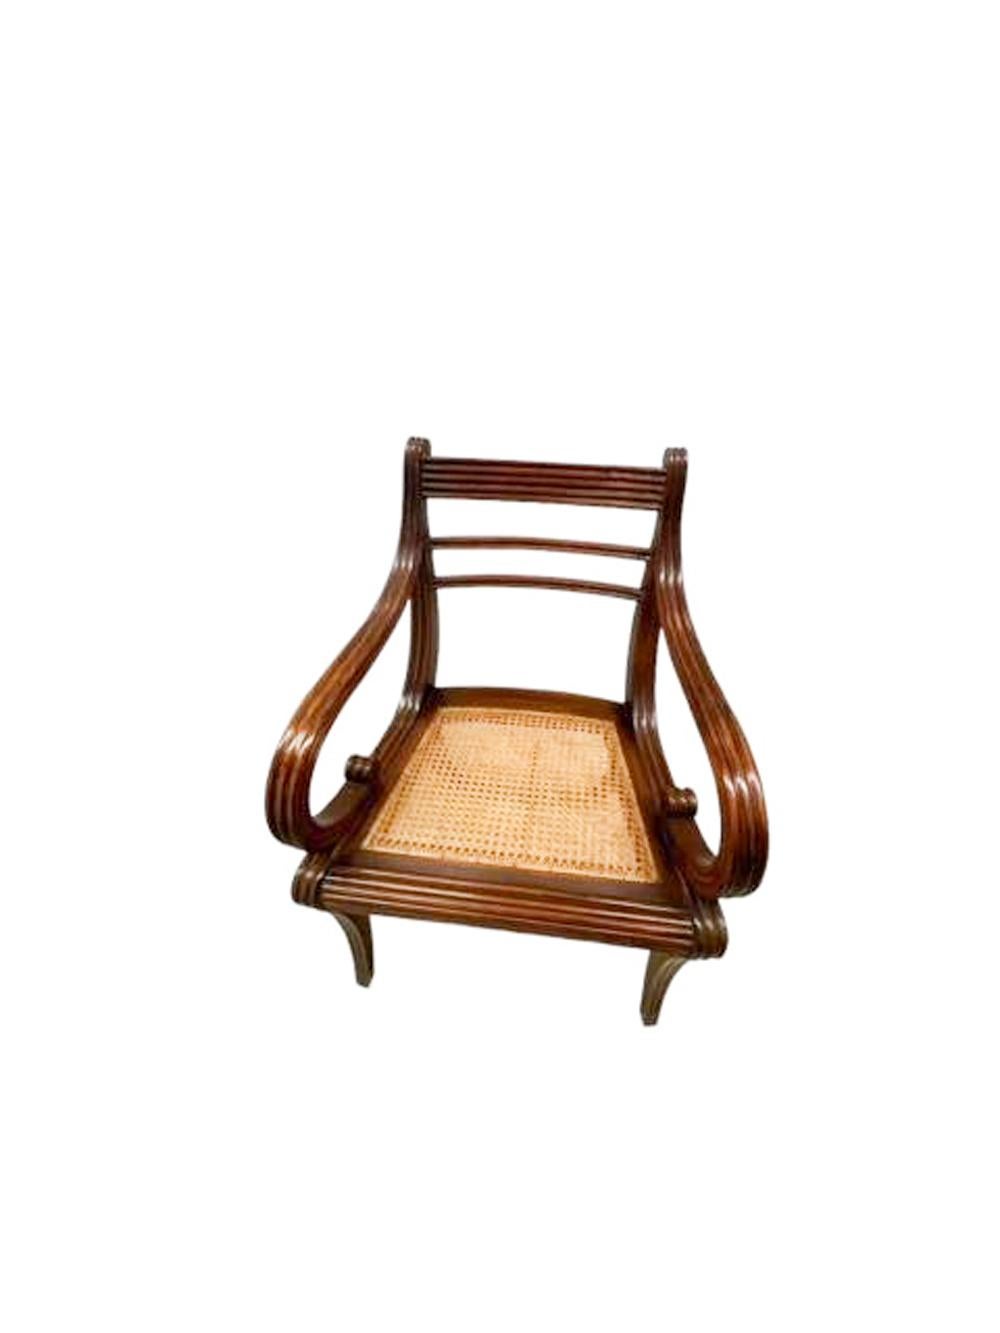 Pair of Anglo-Indian Mahogany Armchairs with Reeded Detail and Caned Seats  In Good Condition For Sale In Nantucket, MA